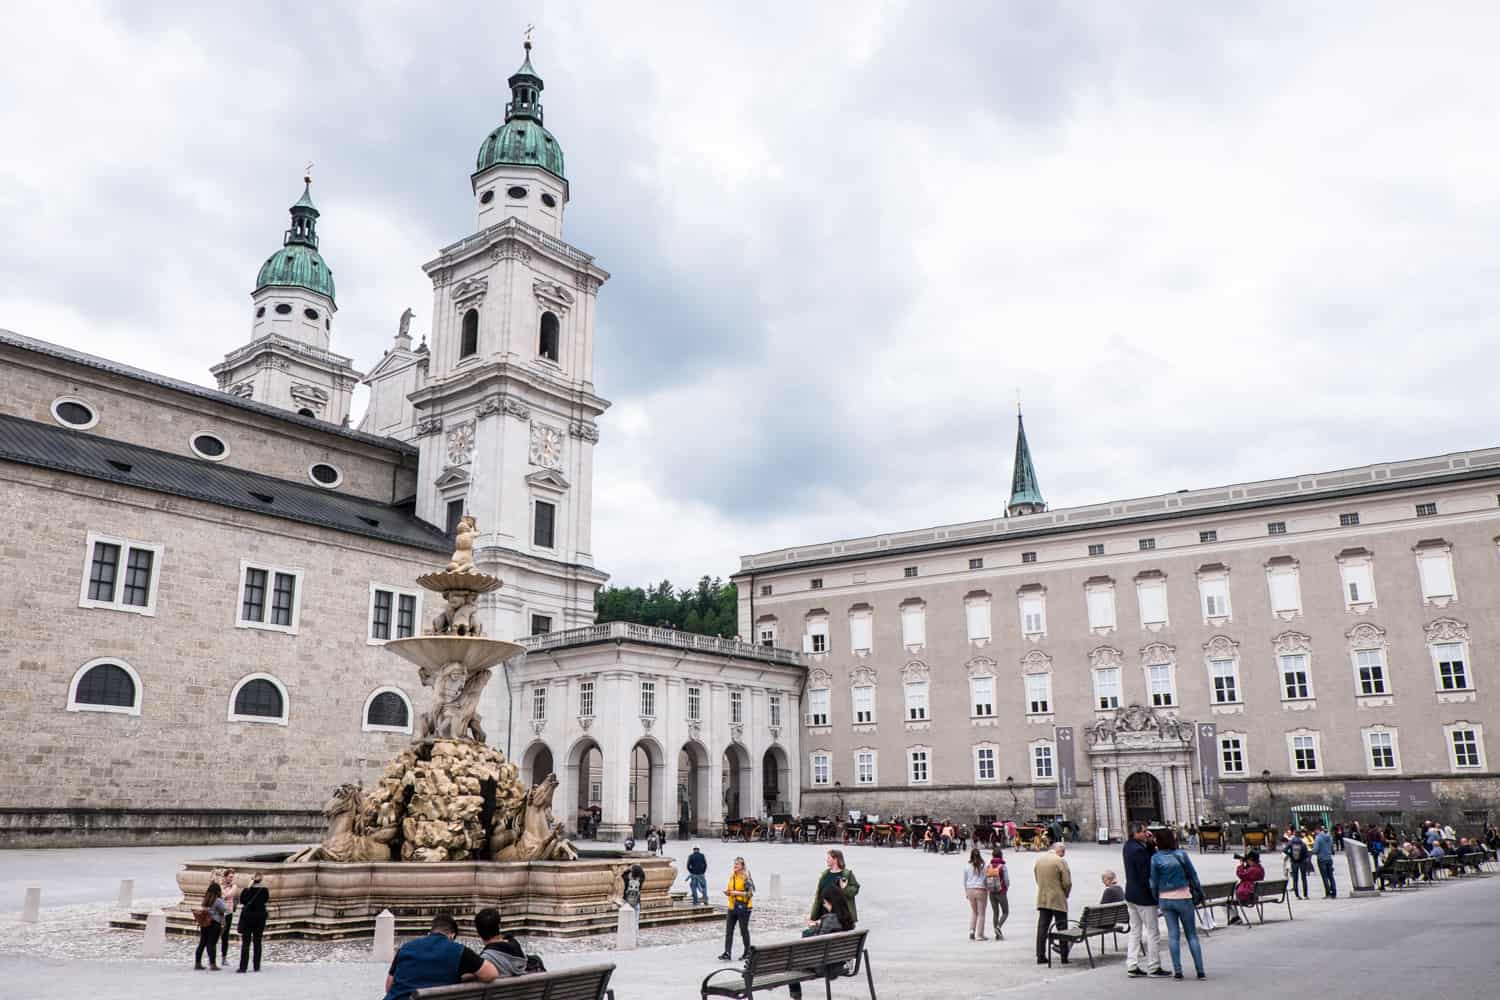 A Public Square with beige and white building with mint green spires surround a Golden Fountain in Salzburg.